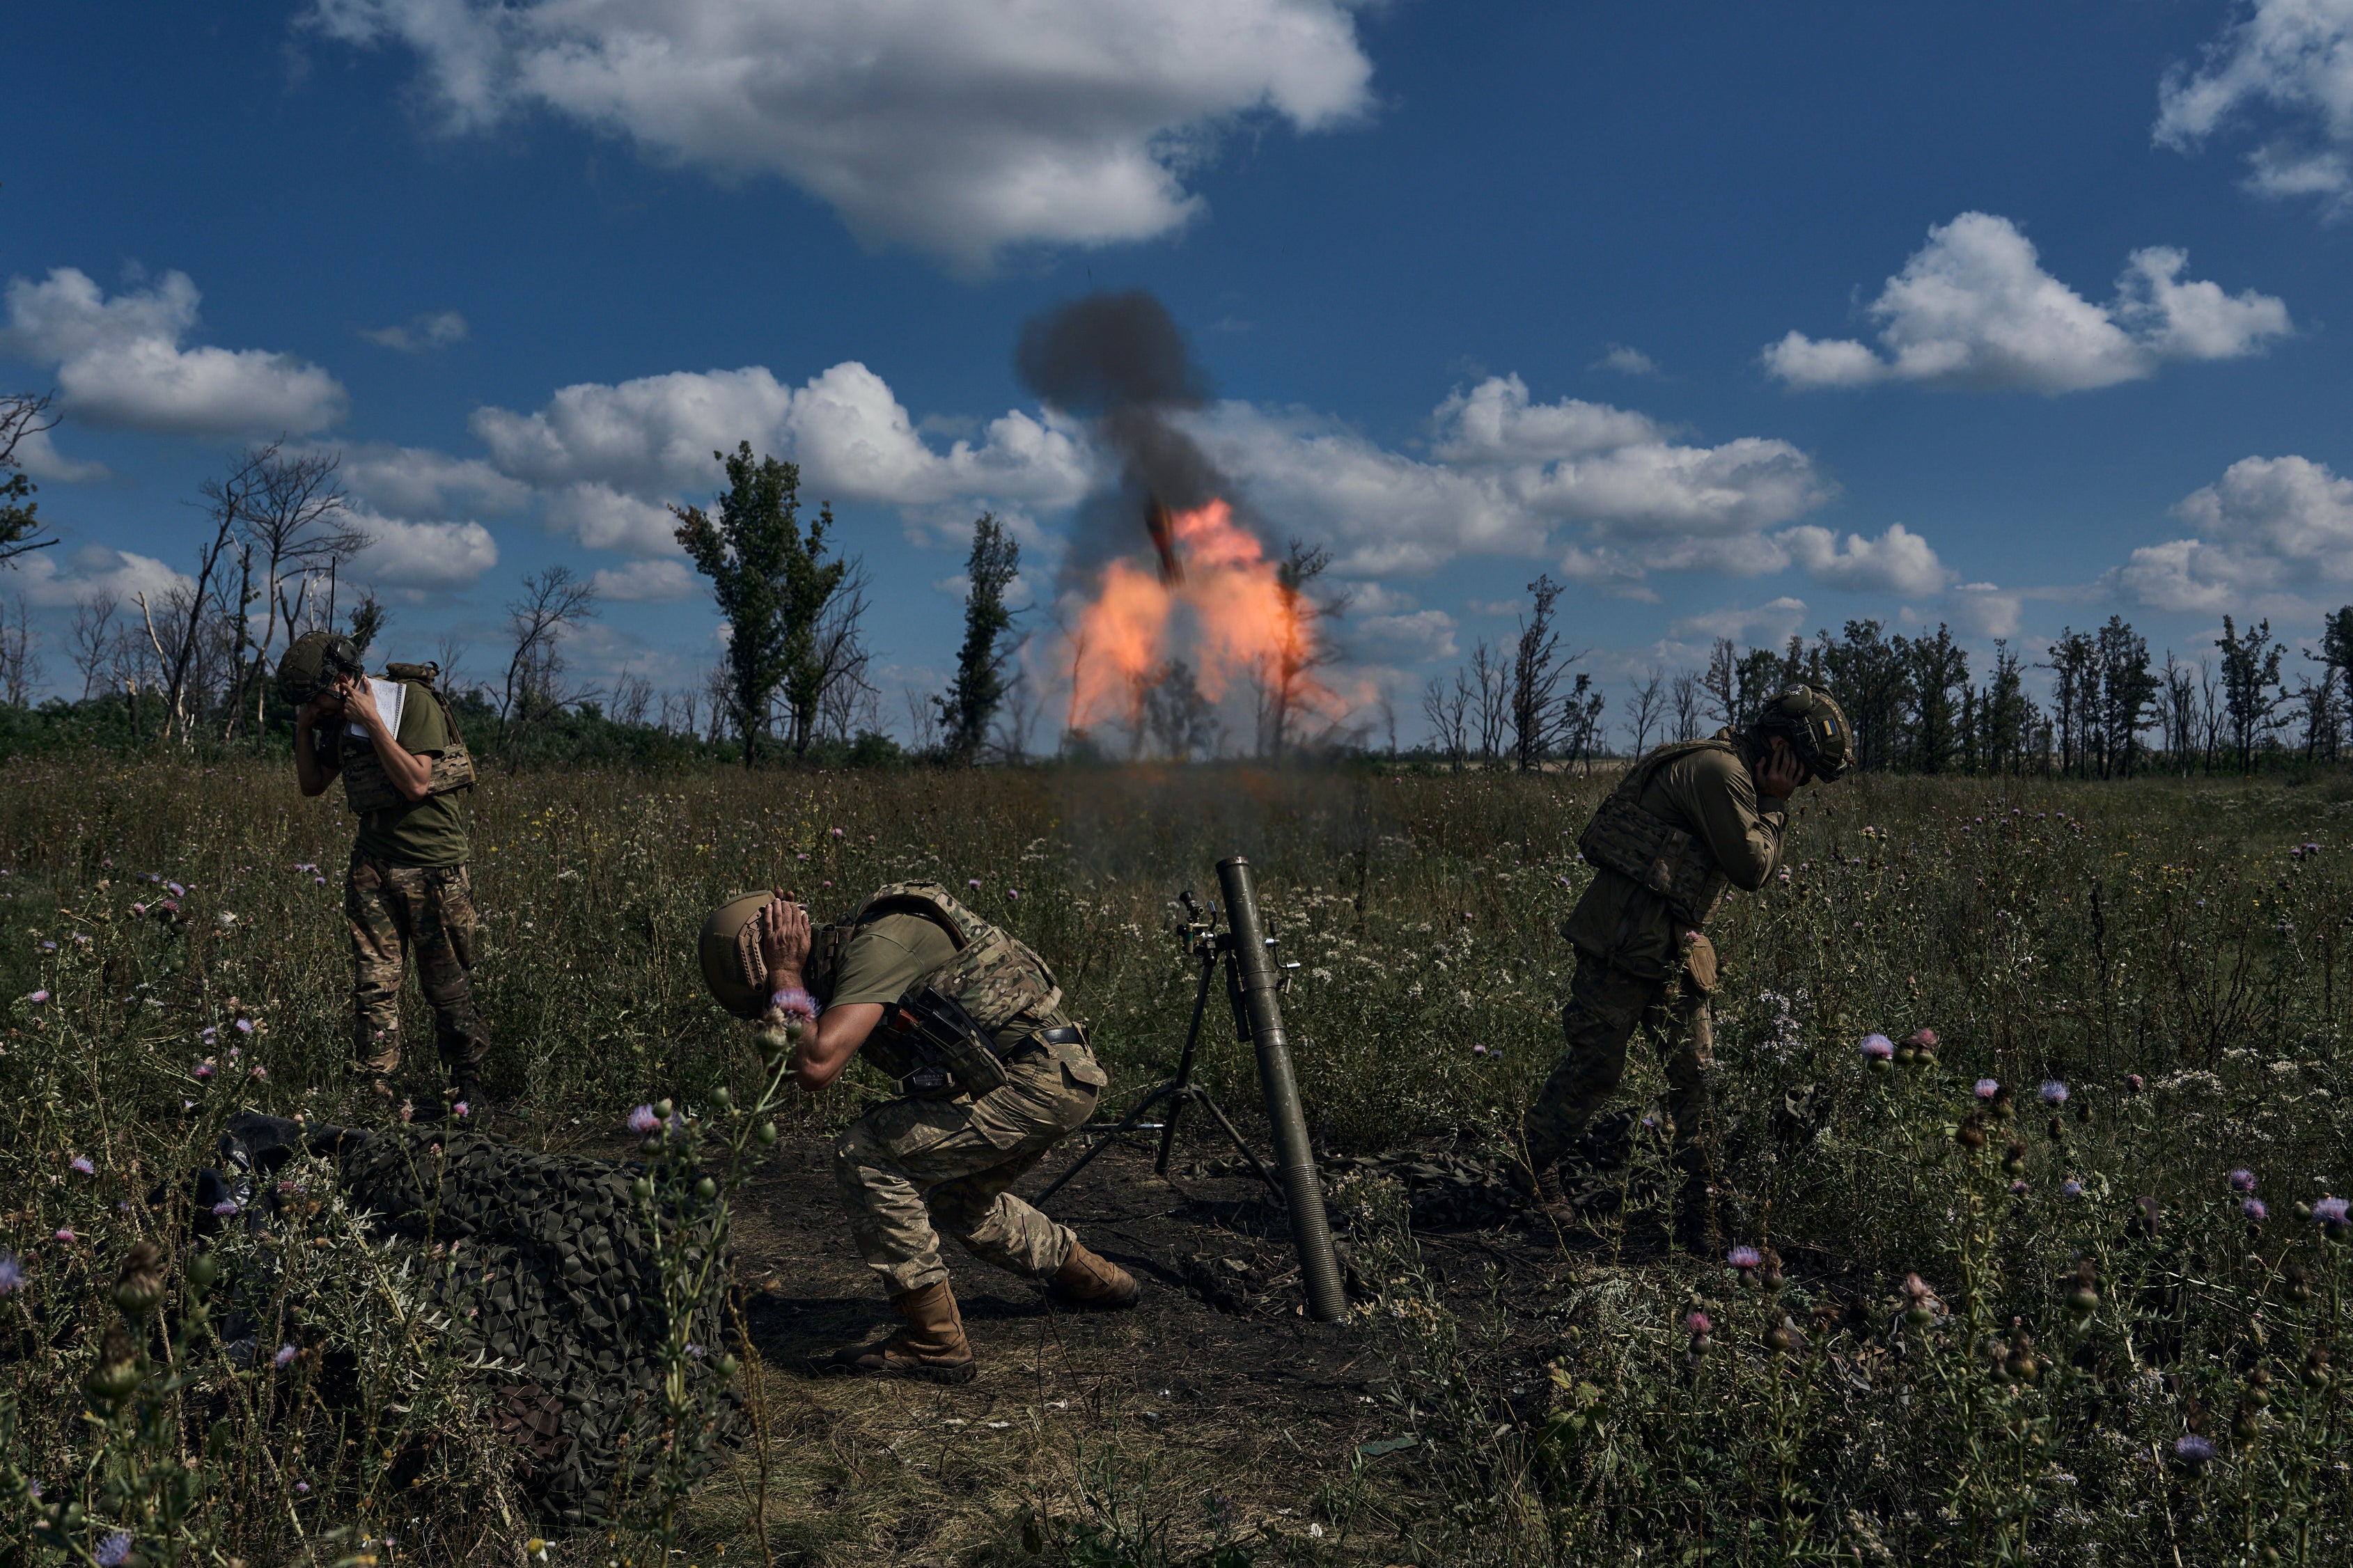 Ukrainian soldiers fire a mortar towards Russian positions at the front line, near Bakhmut